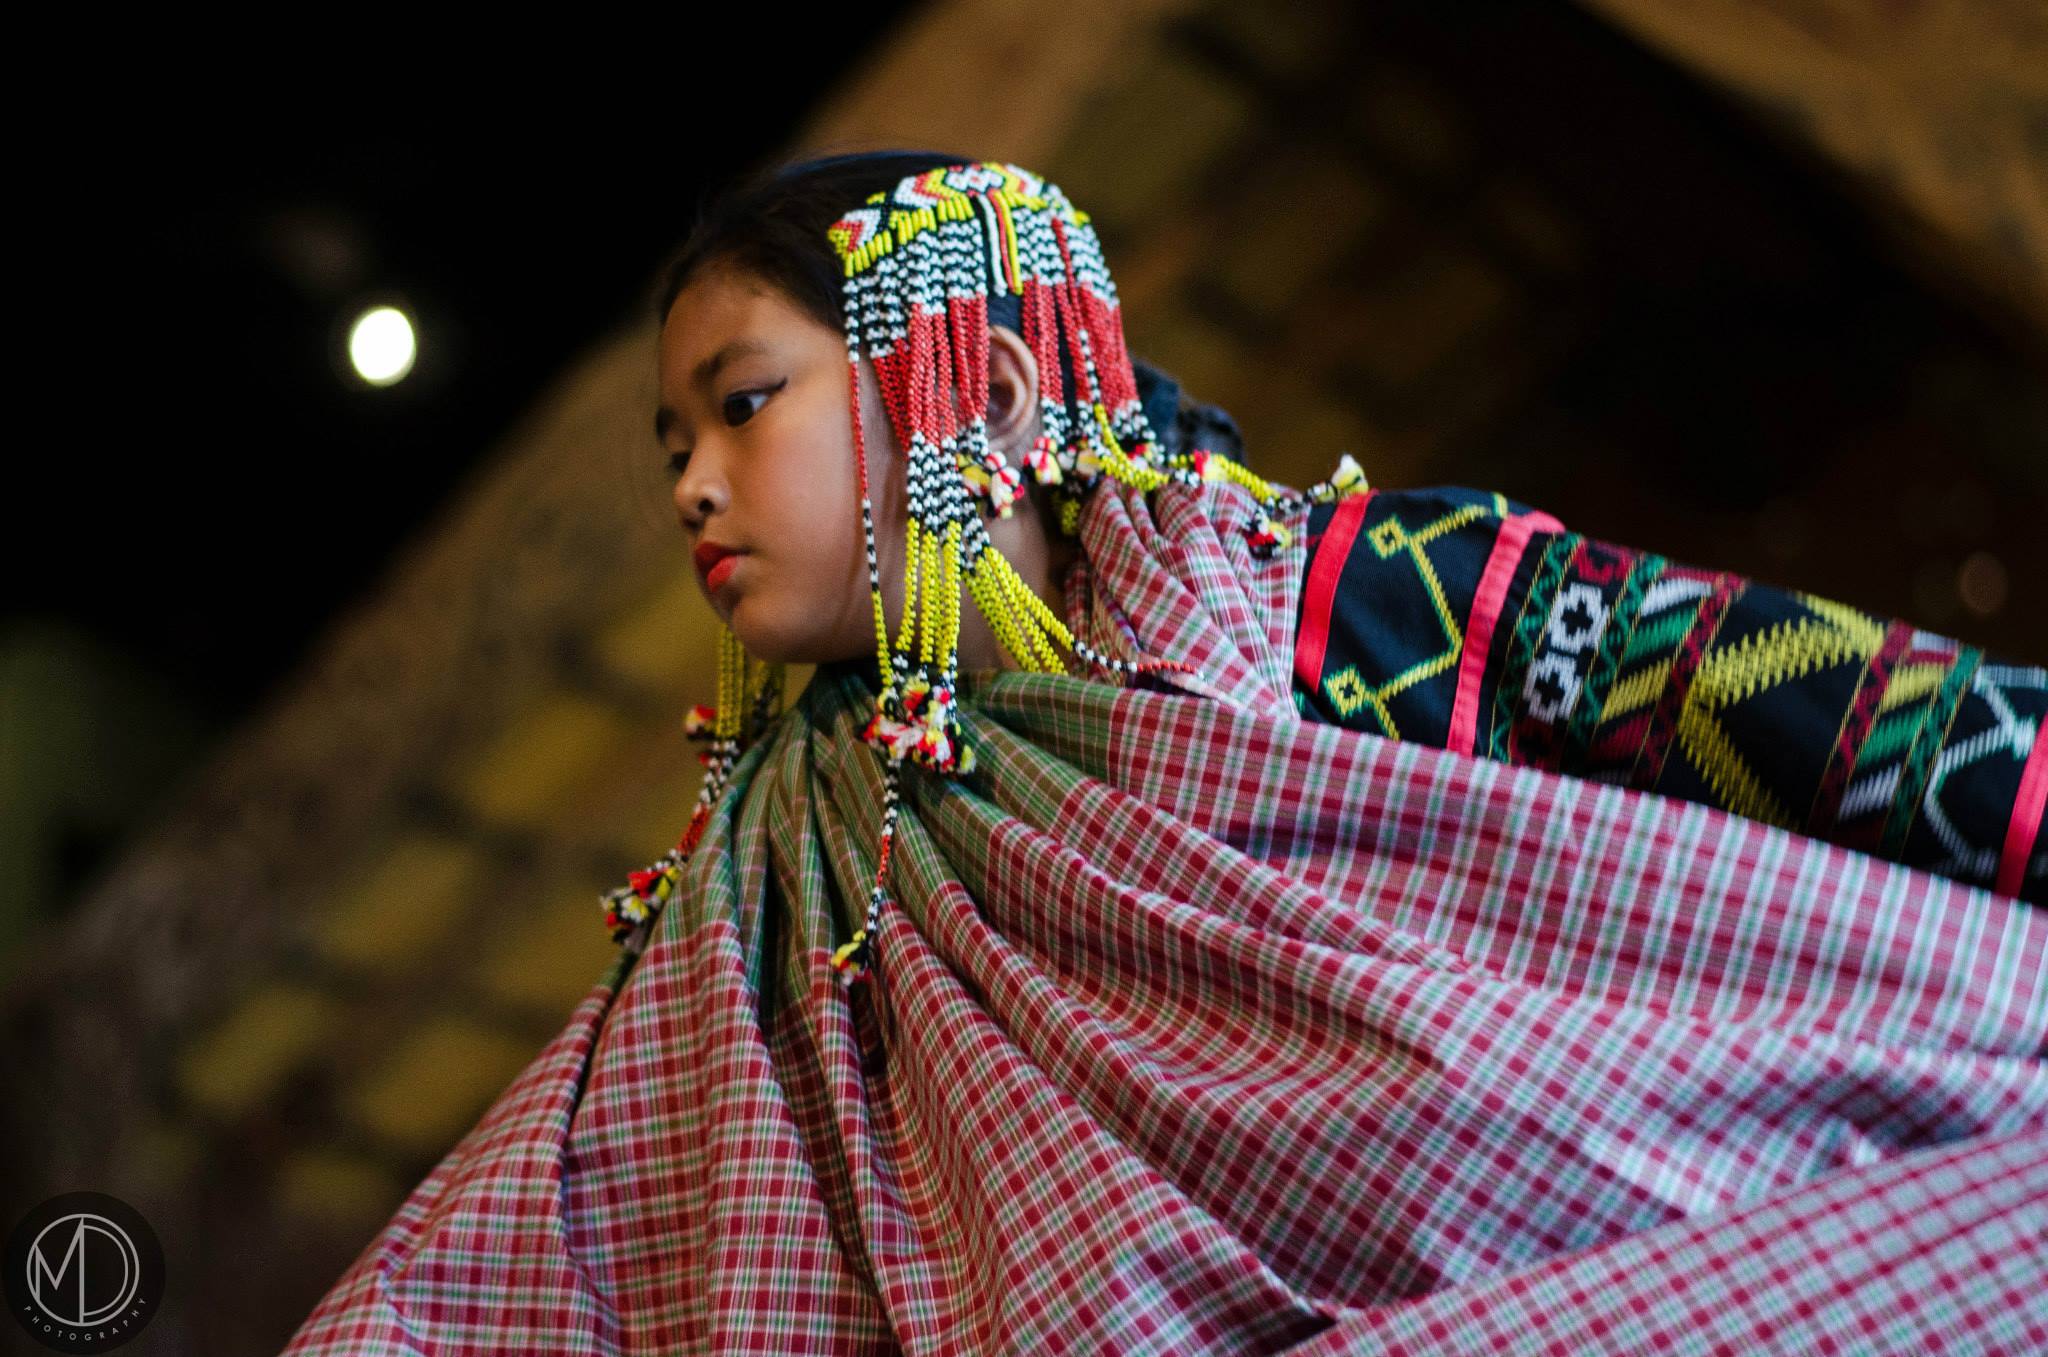 Young girl performing during FAAP's dance set. (c) Field Museum of Natural History - CC BY-NC 4.0